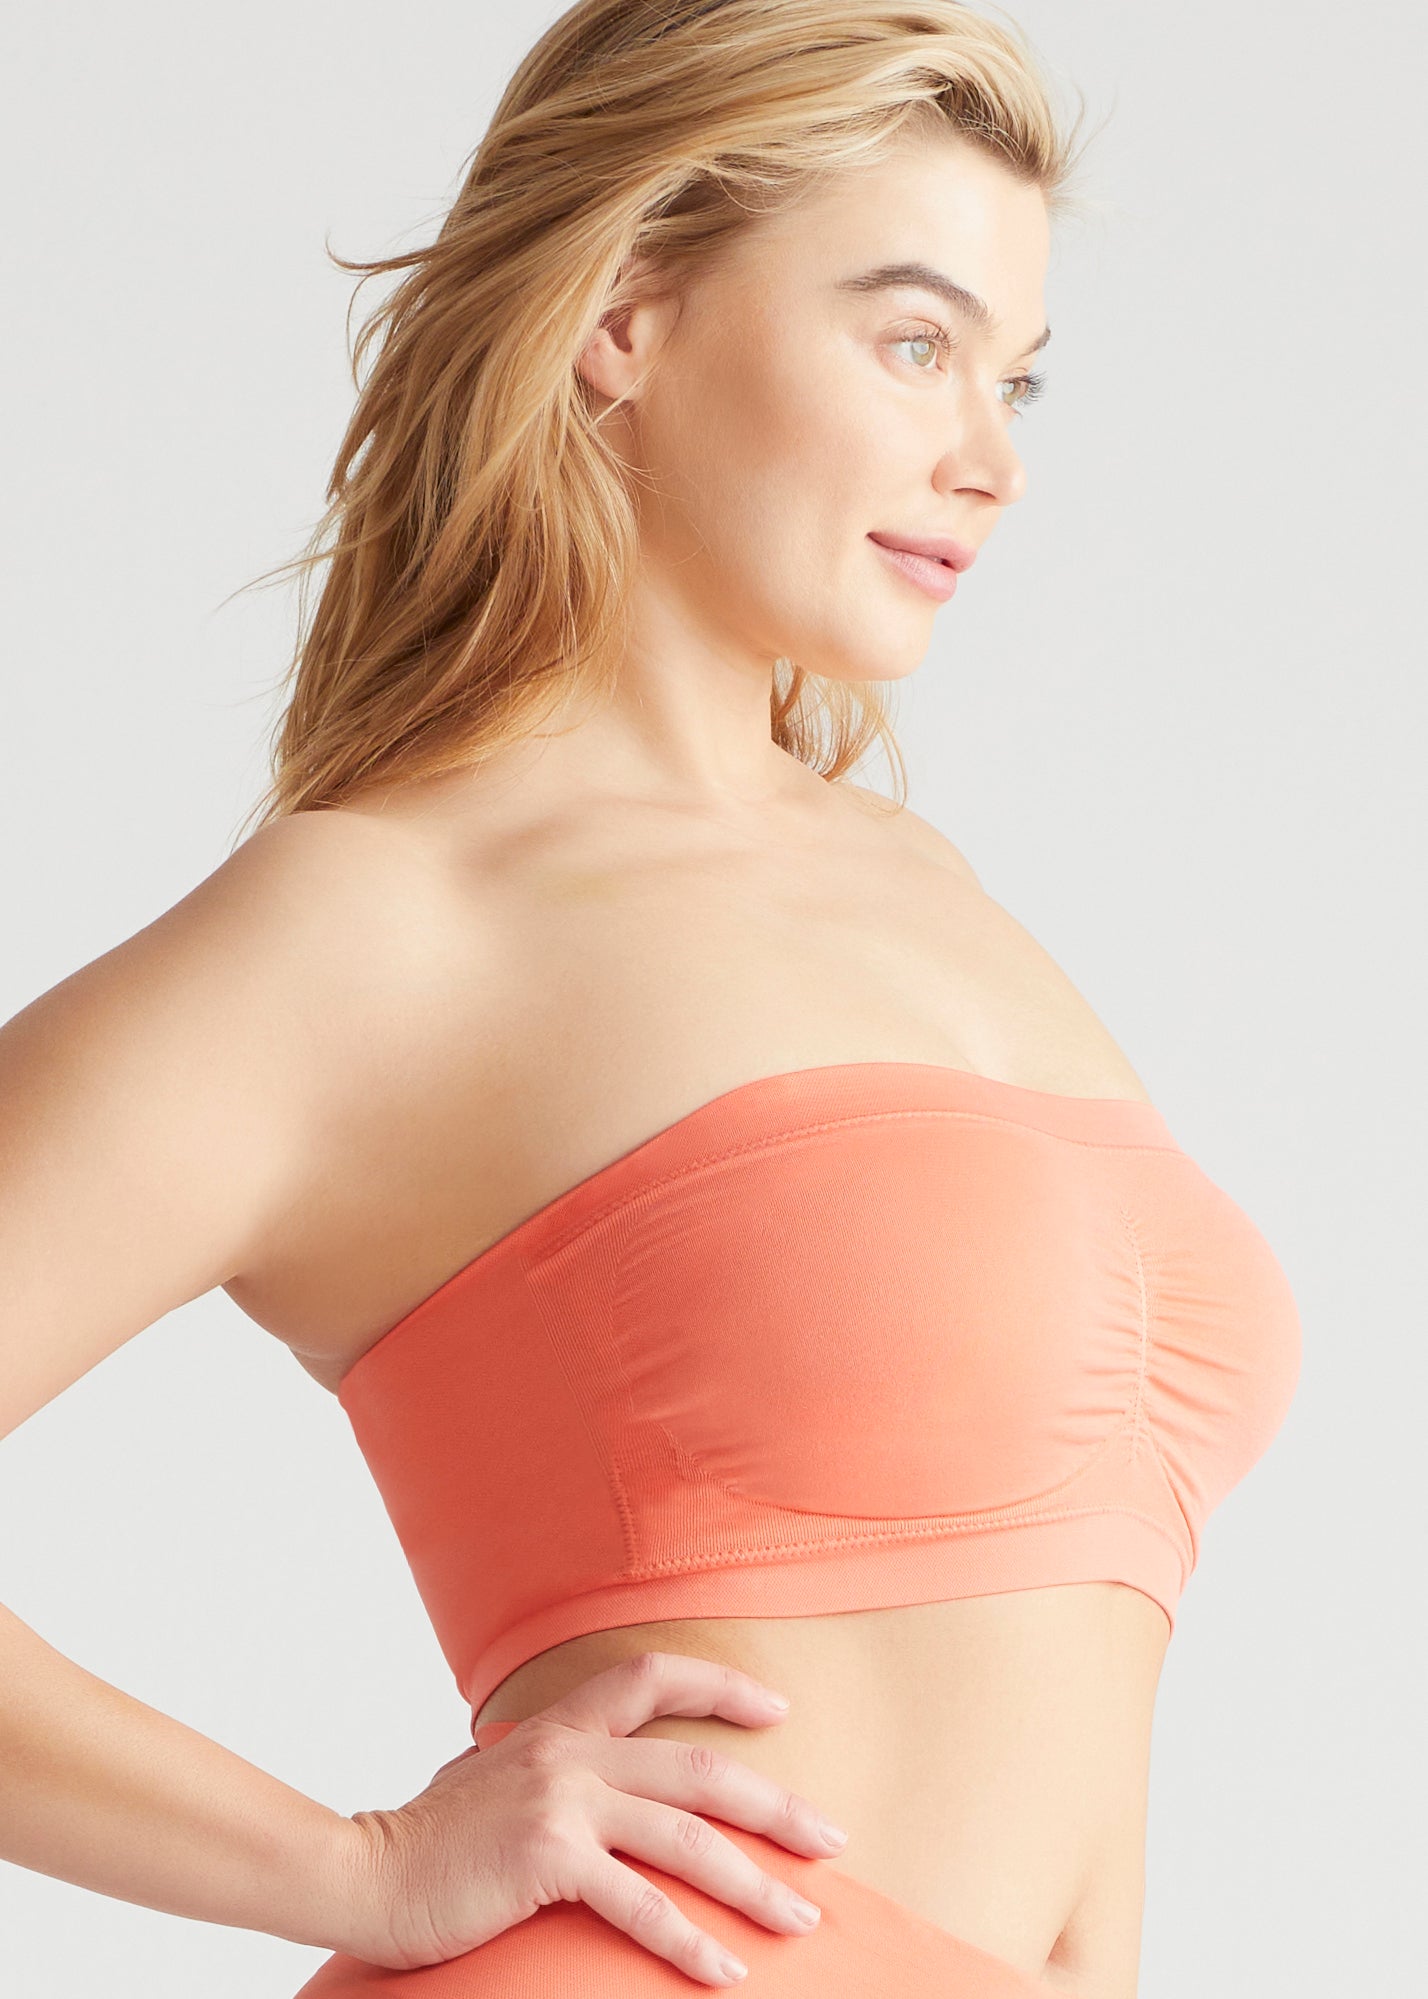 bandeau bra - seamless in Peach Echo worn by a woman standing sideways with right hand on hip Yummie